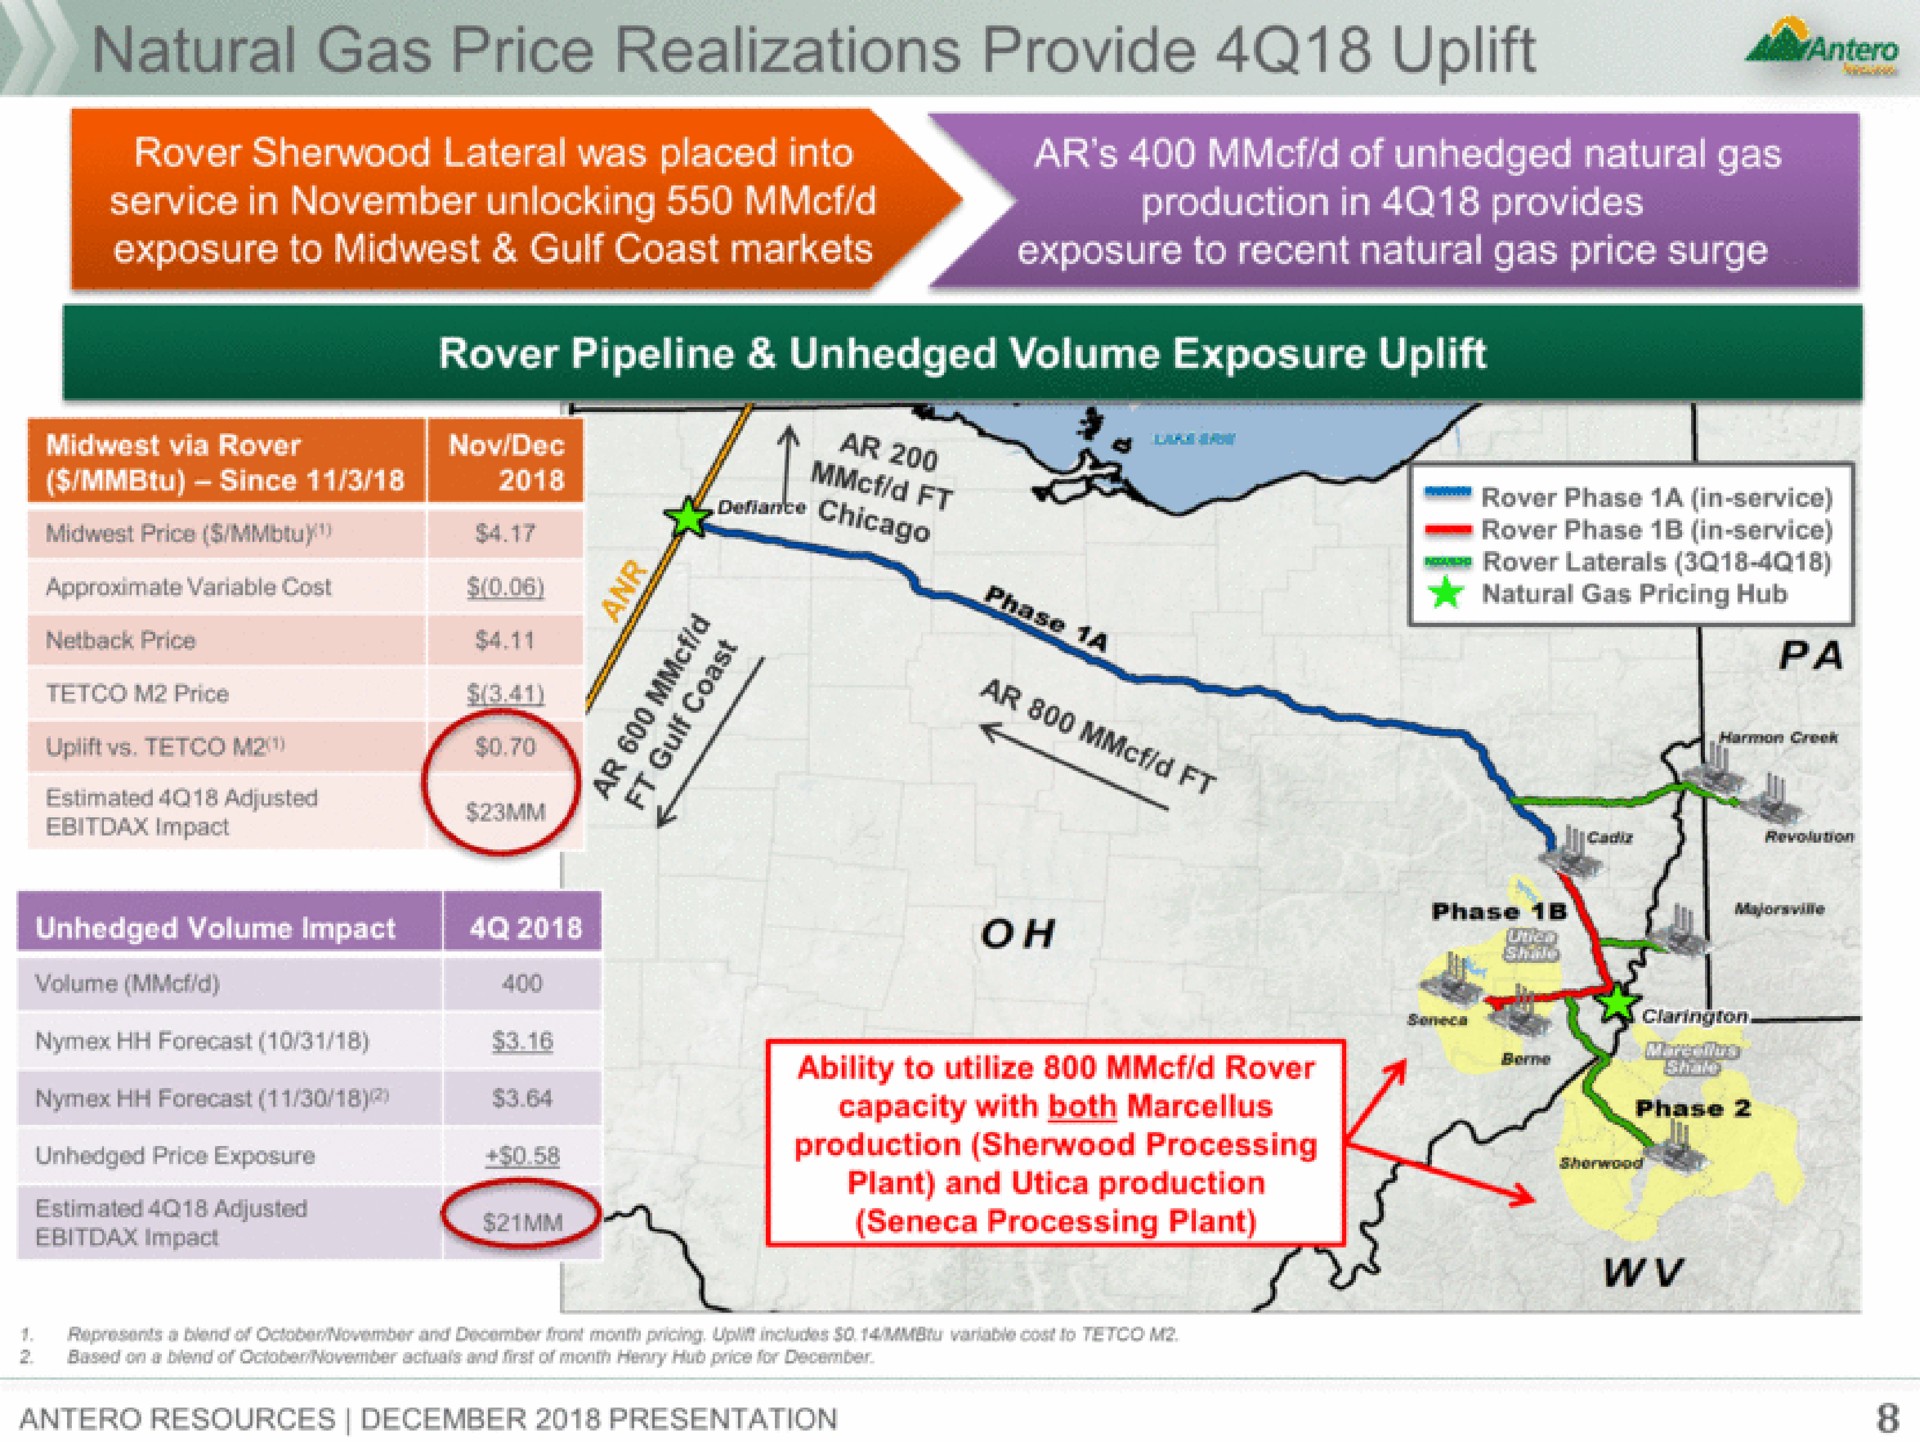 natural gas price realizations provide uplift | Antero Midstream Partners